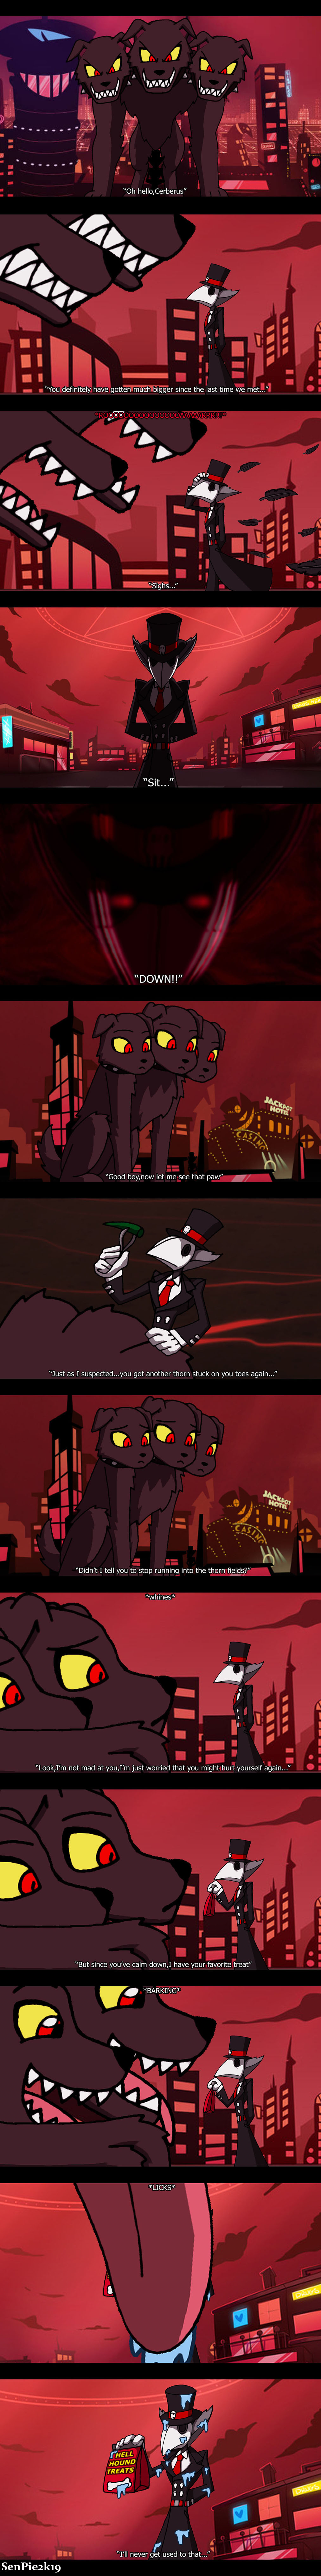 HHOC The old crow doctor and the cerberus by ZeroSenPie on DeviantArt